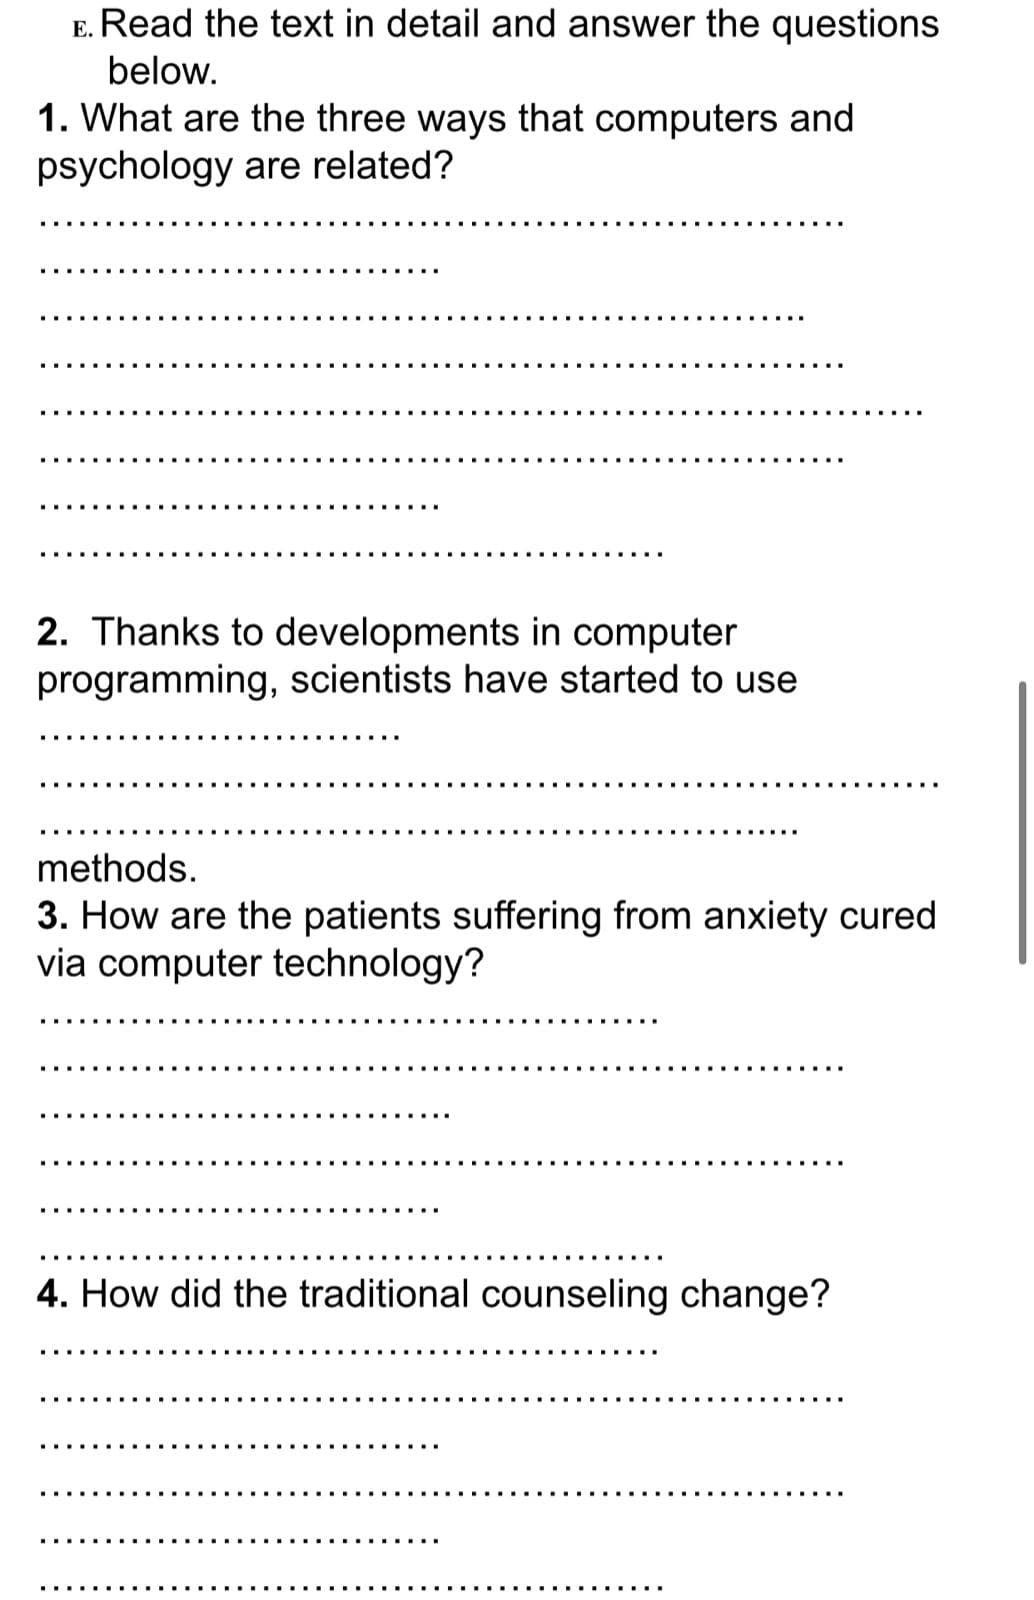 E. Read the text in detail and answer the questions
below.
1. What are the three ways that computers and
psychology are related?
2. Thanks to developments in computer
programming, scientists have started to use
methods.
3. How are the patients suffering from anxiety cured
via computer technology?
4. How did the traditional counseling change?
